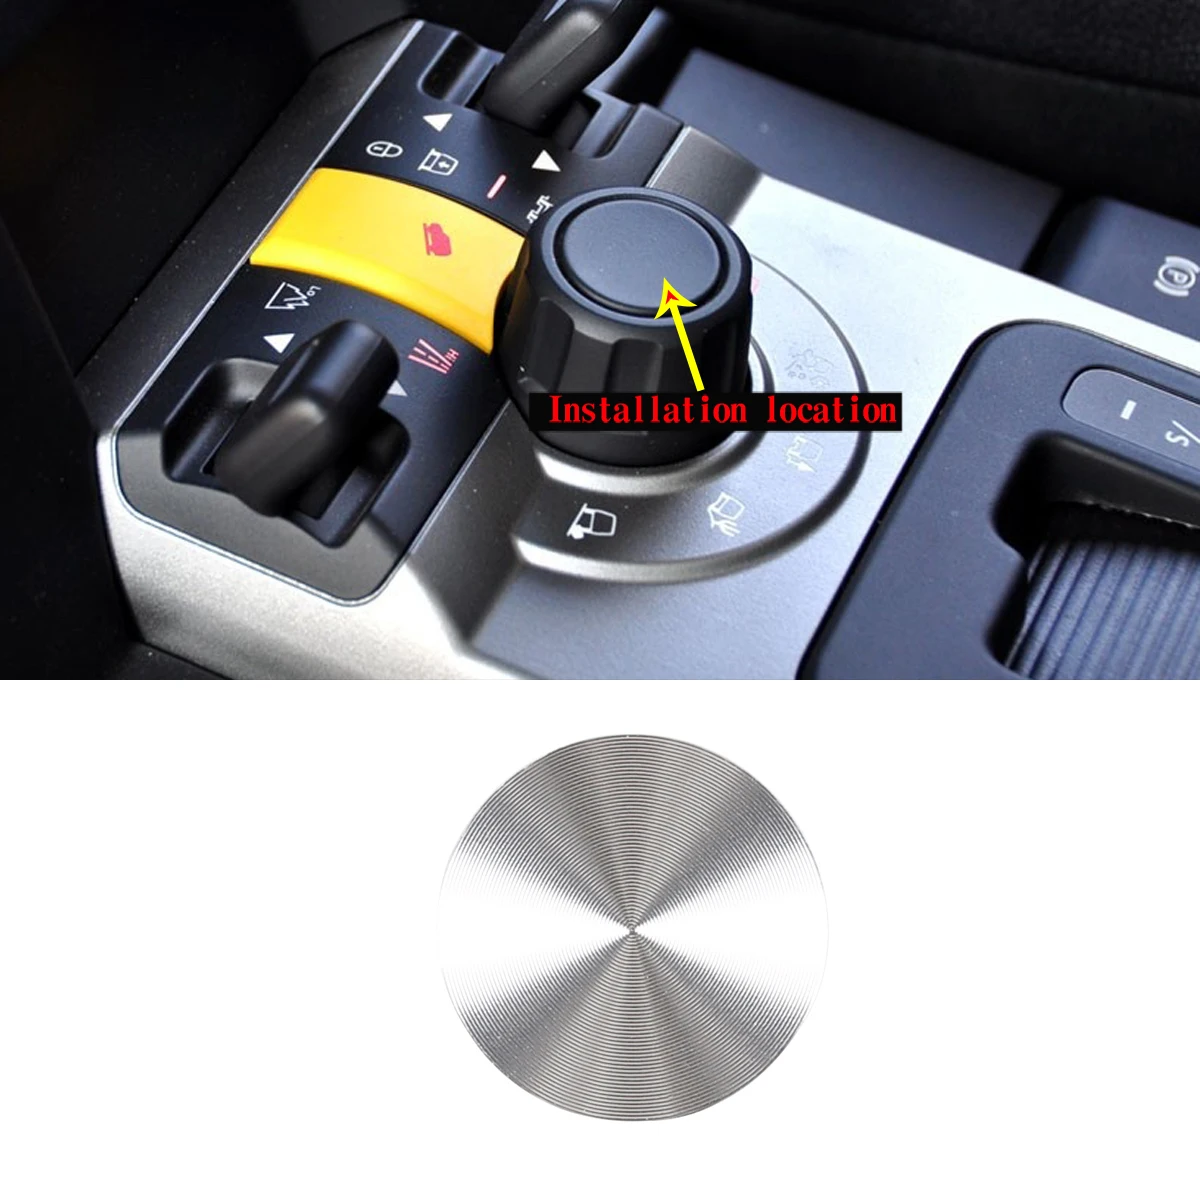 

Stainless Steel Car Styling for Land Rover Discovery 3 Central Control Gear Terrain Mode Adjustment knob Sticker Car Accessories